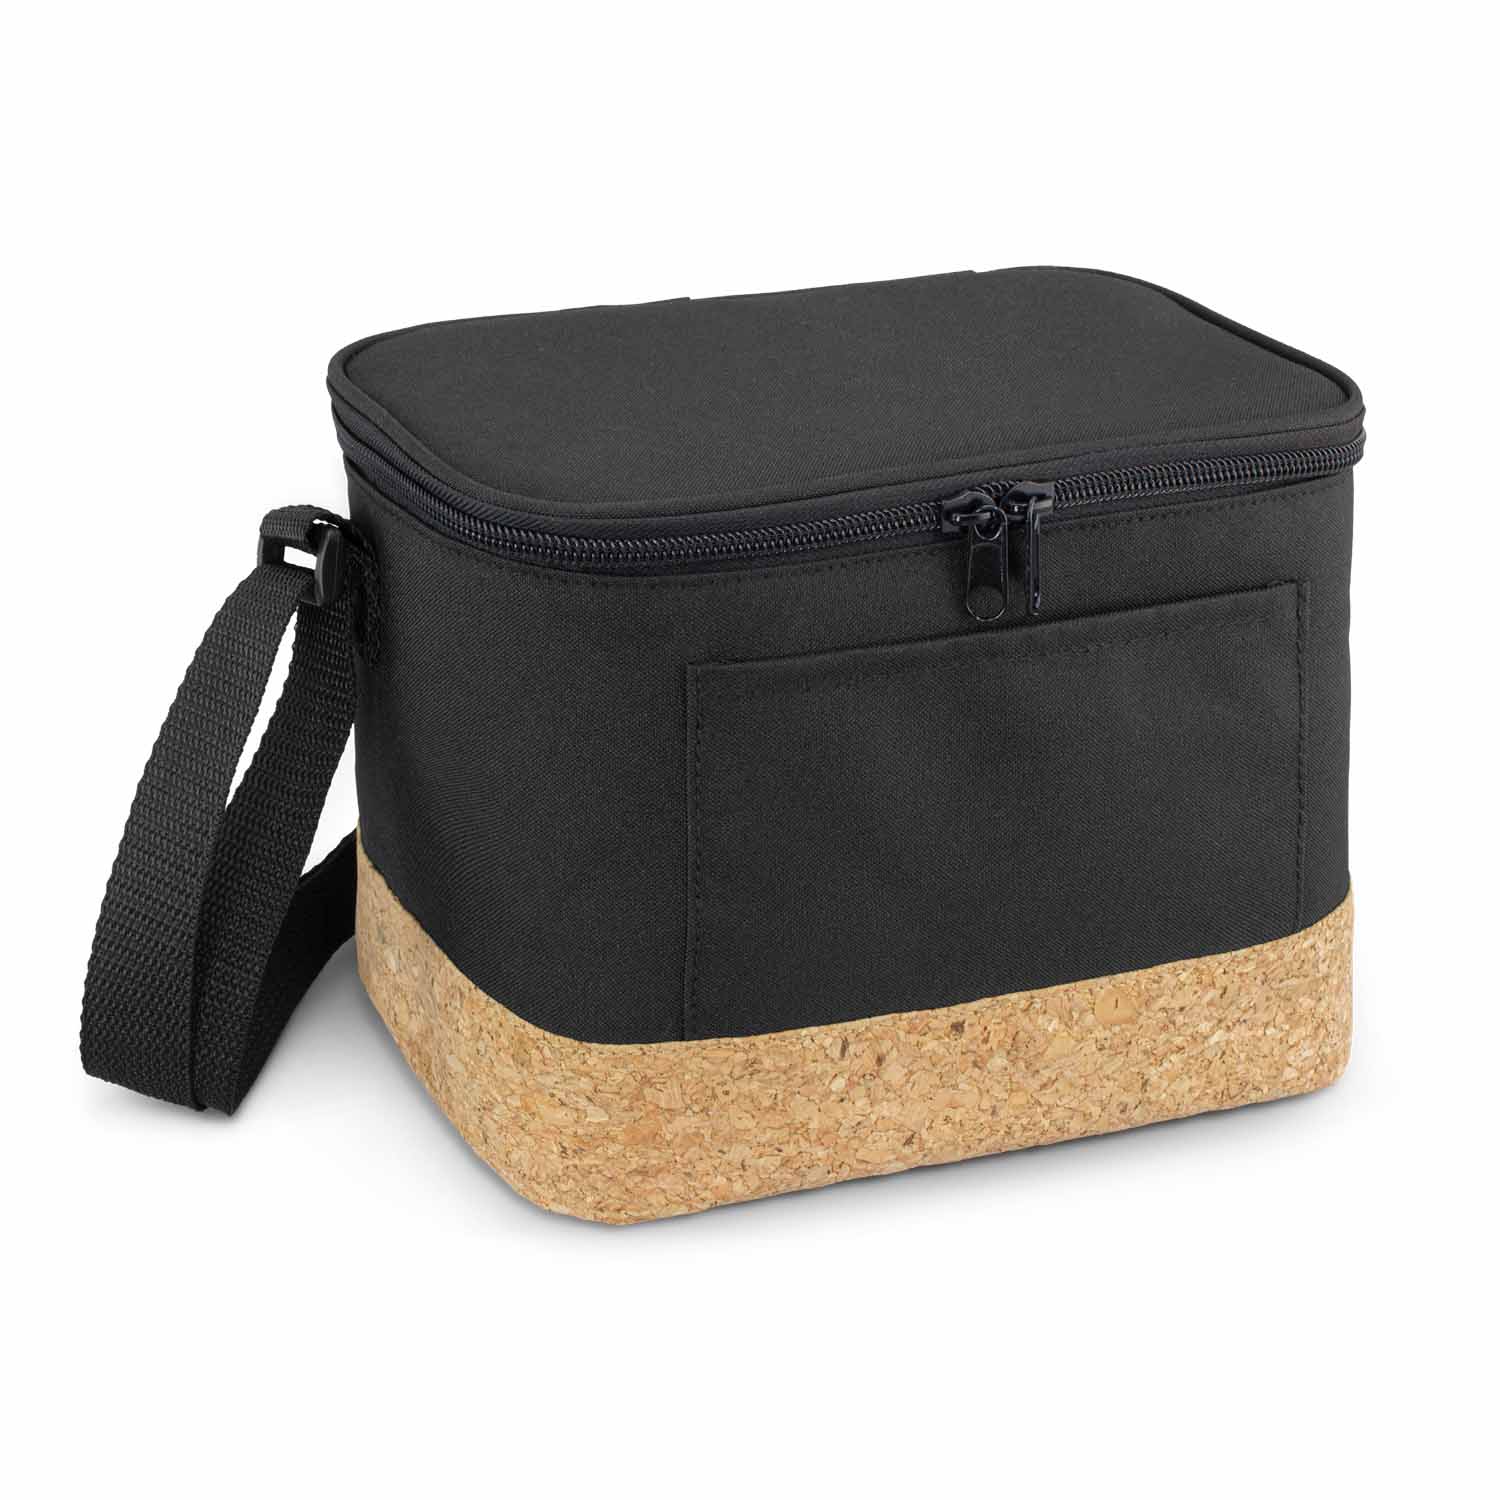 Get Coast Cooler Bags Online in Perth